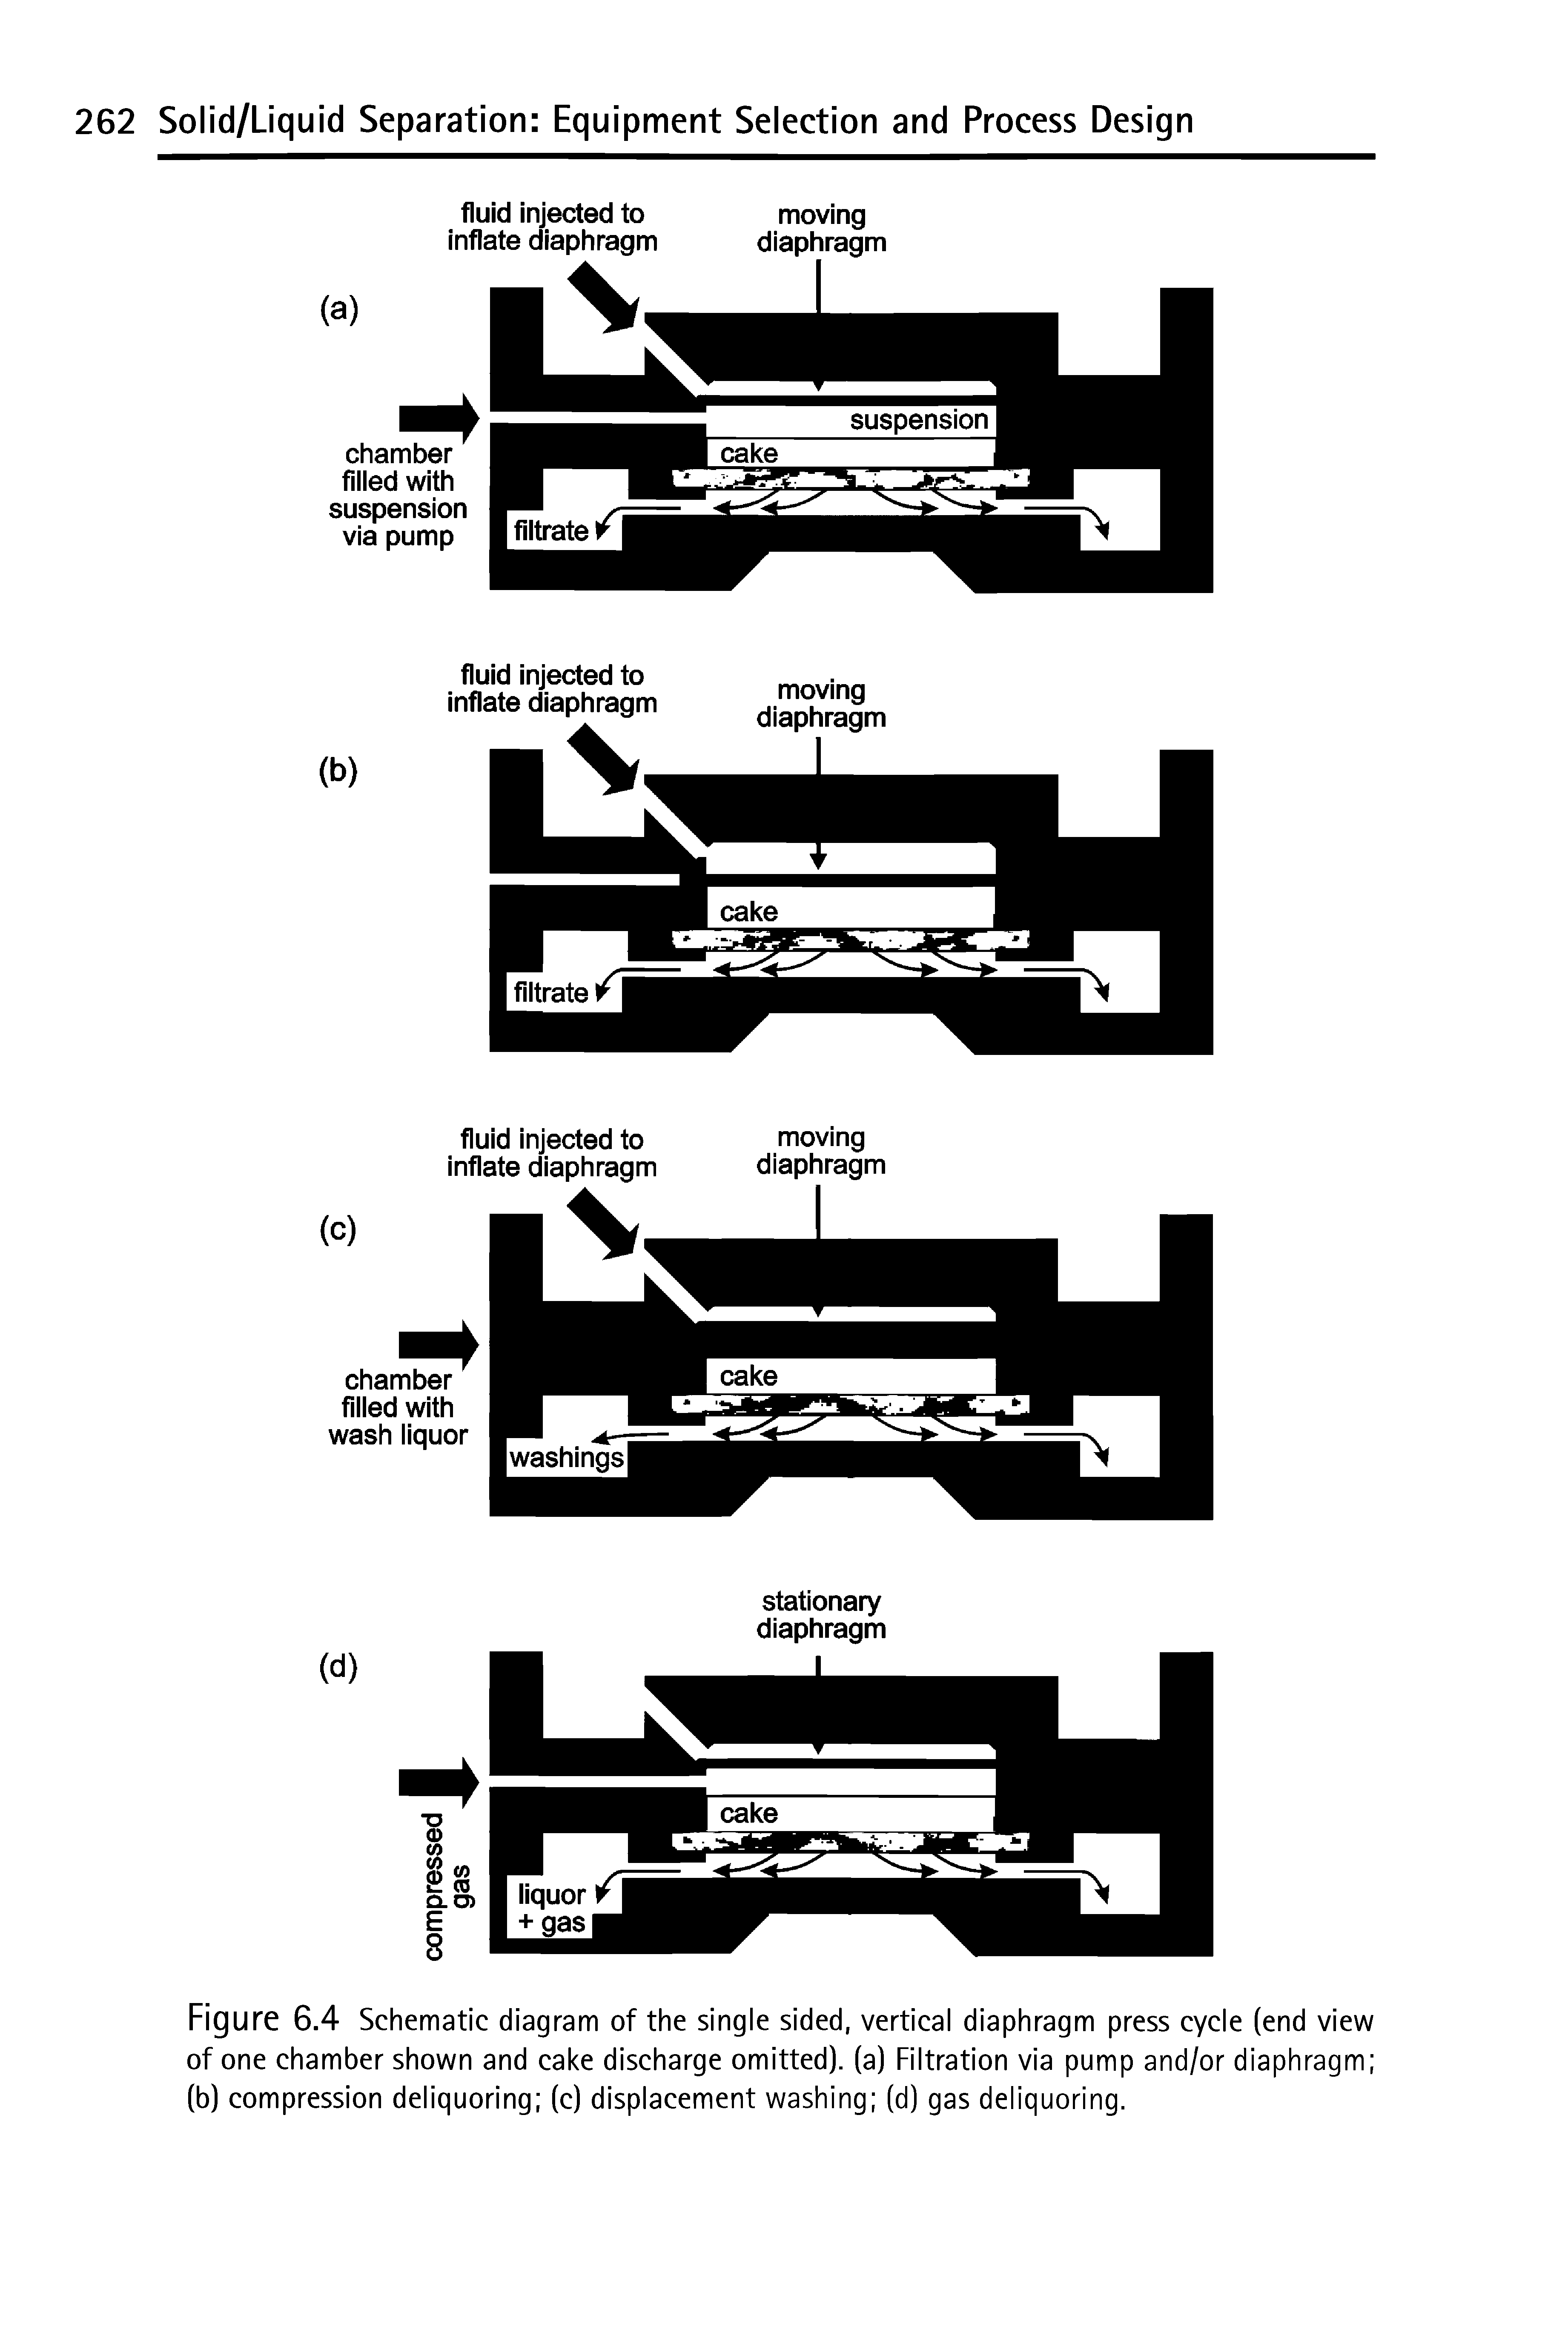 Figure 6.4 Schematic diagram of the single sided, vertical diaphragm press cycle (end view of one chamber shown and cake discharge omitted), (a) Filtration via pump and/or diaphragm (b) compression deliquoring (c) displacement washing (d) gas deliquoring.